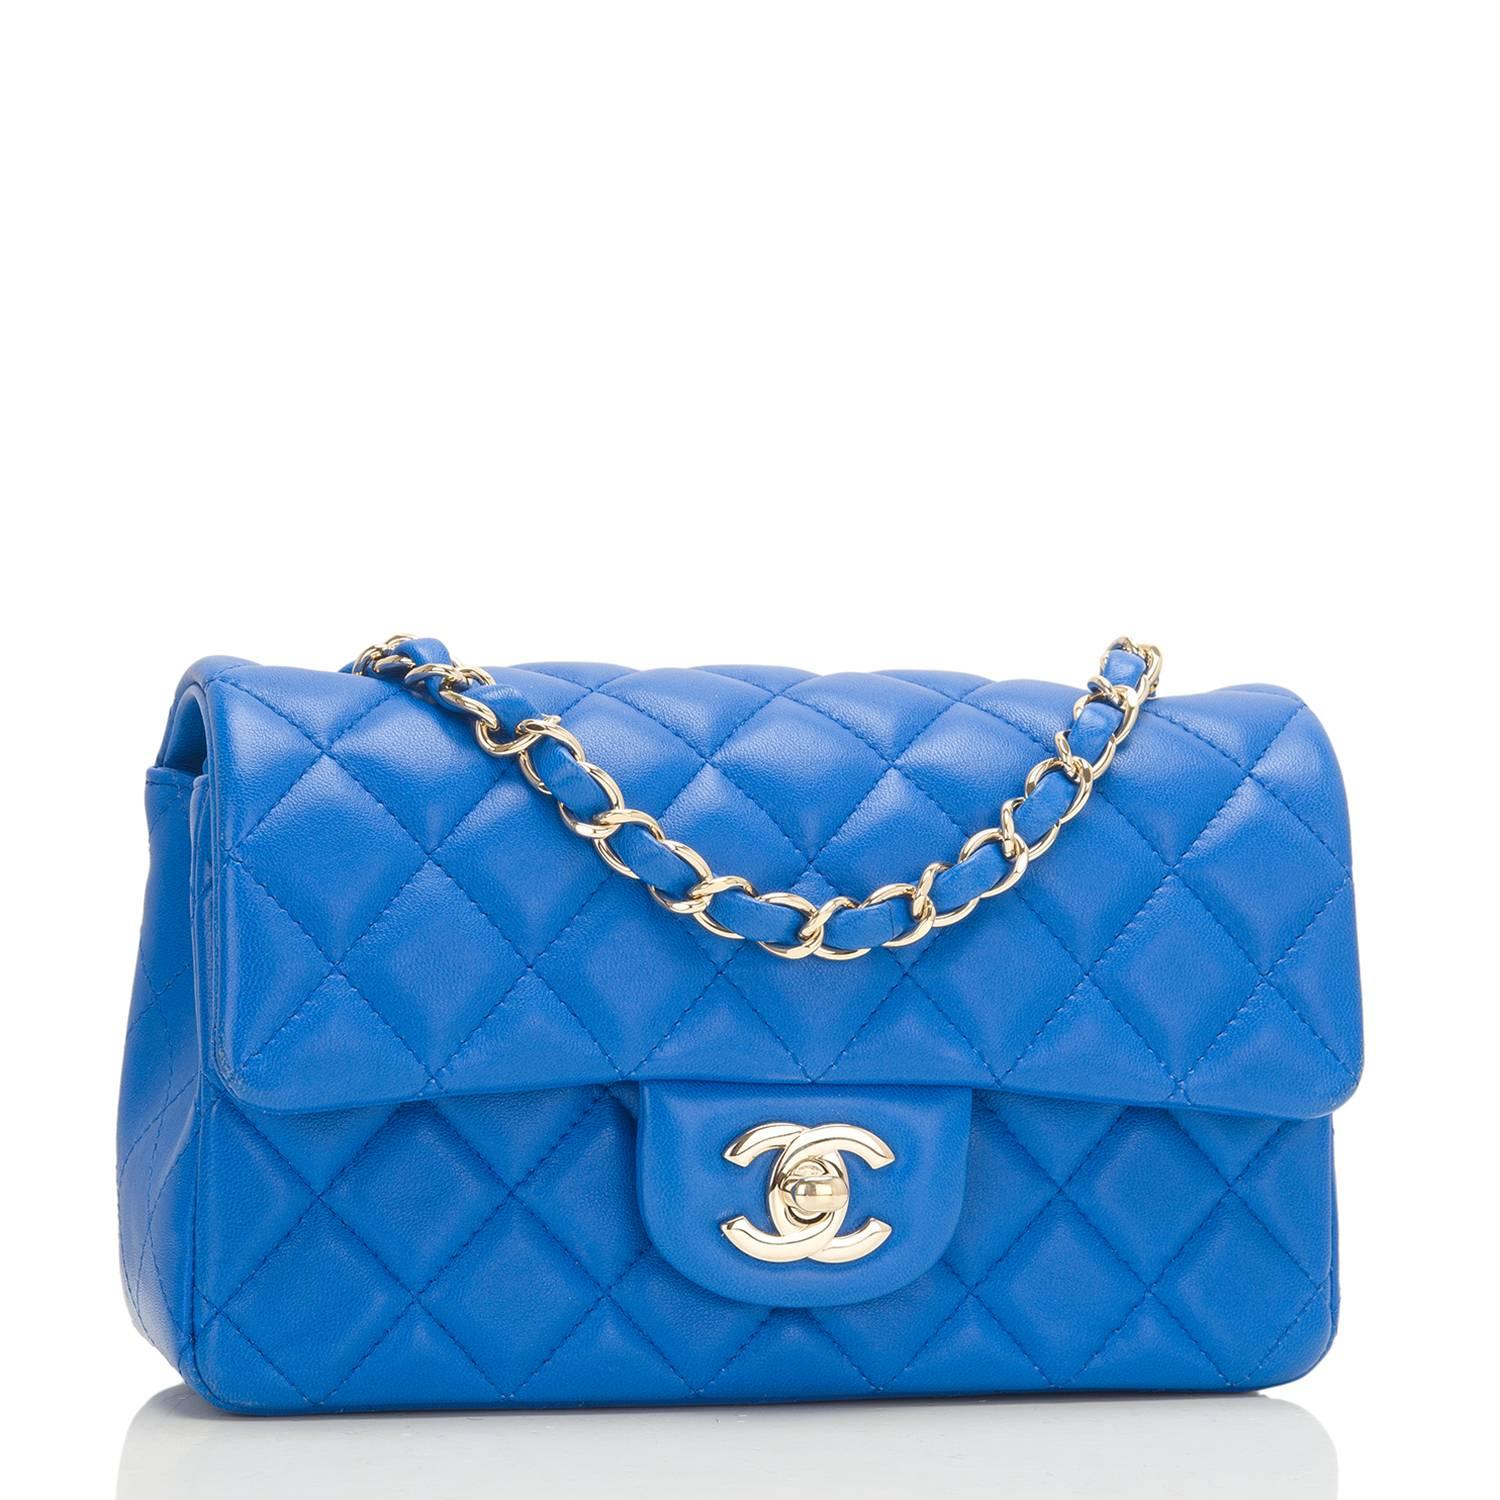 Chanel Rectangular Mini Classic flap bag of blue lambskin with light gold tone hardware.

This bag has a front flap with signature CC turnlock closure, rear half moon pocket and single interwoven blue leather and light gold tone chain link